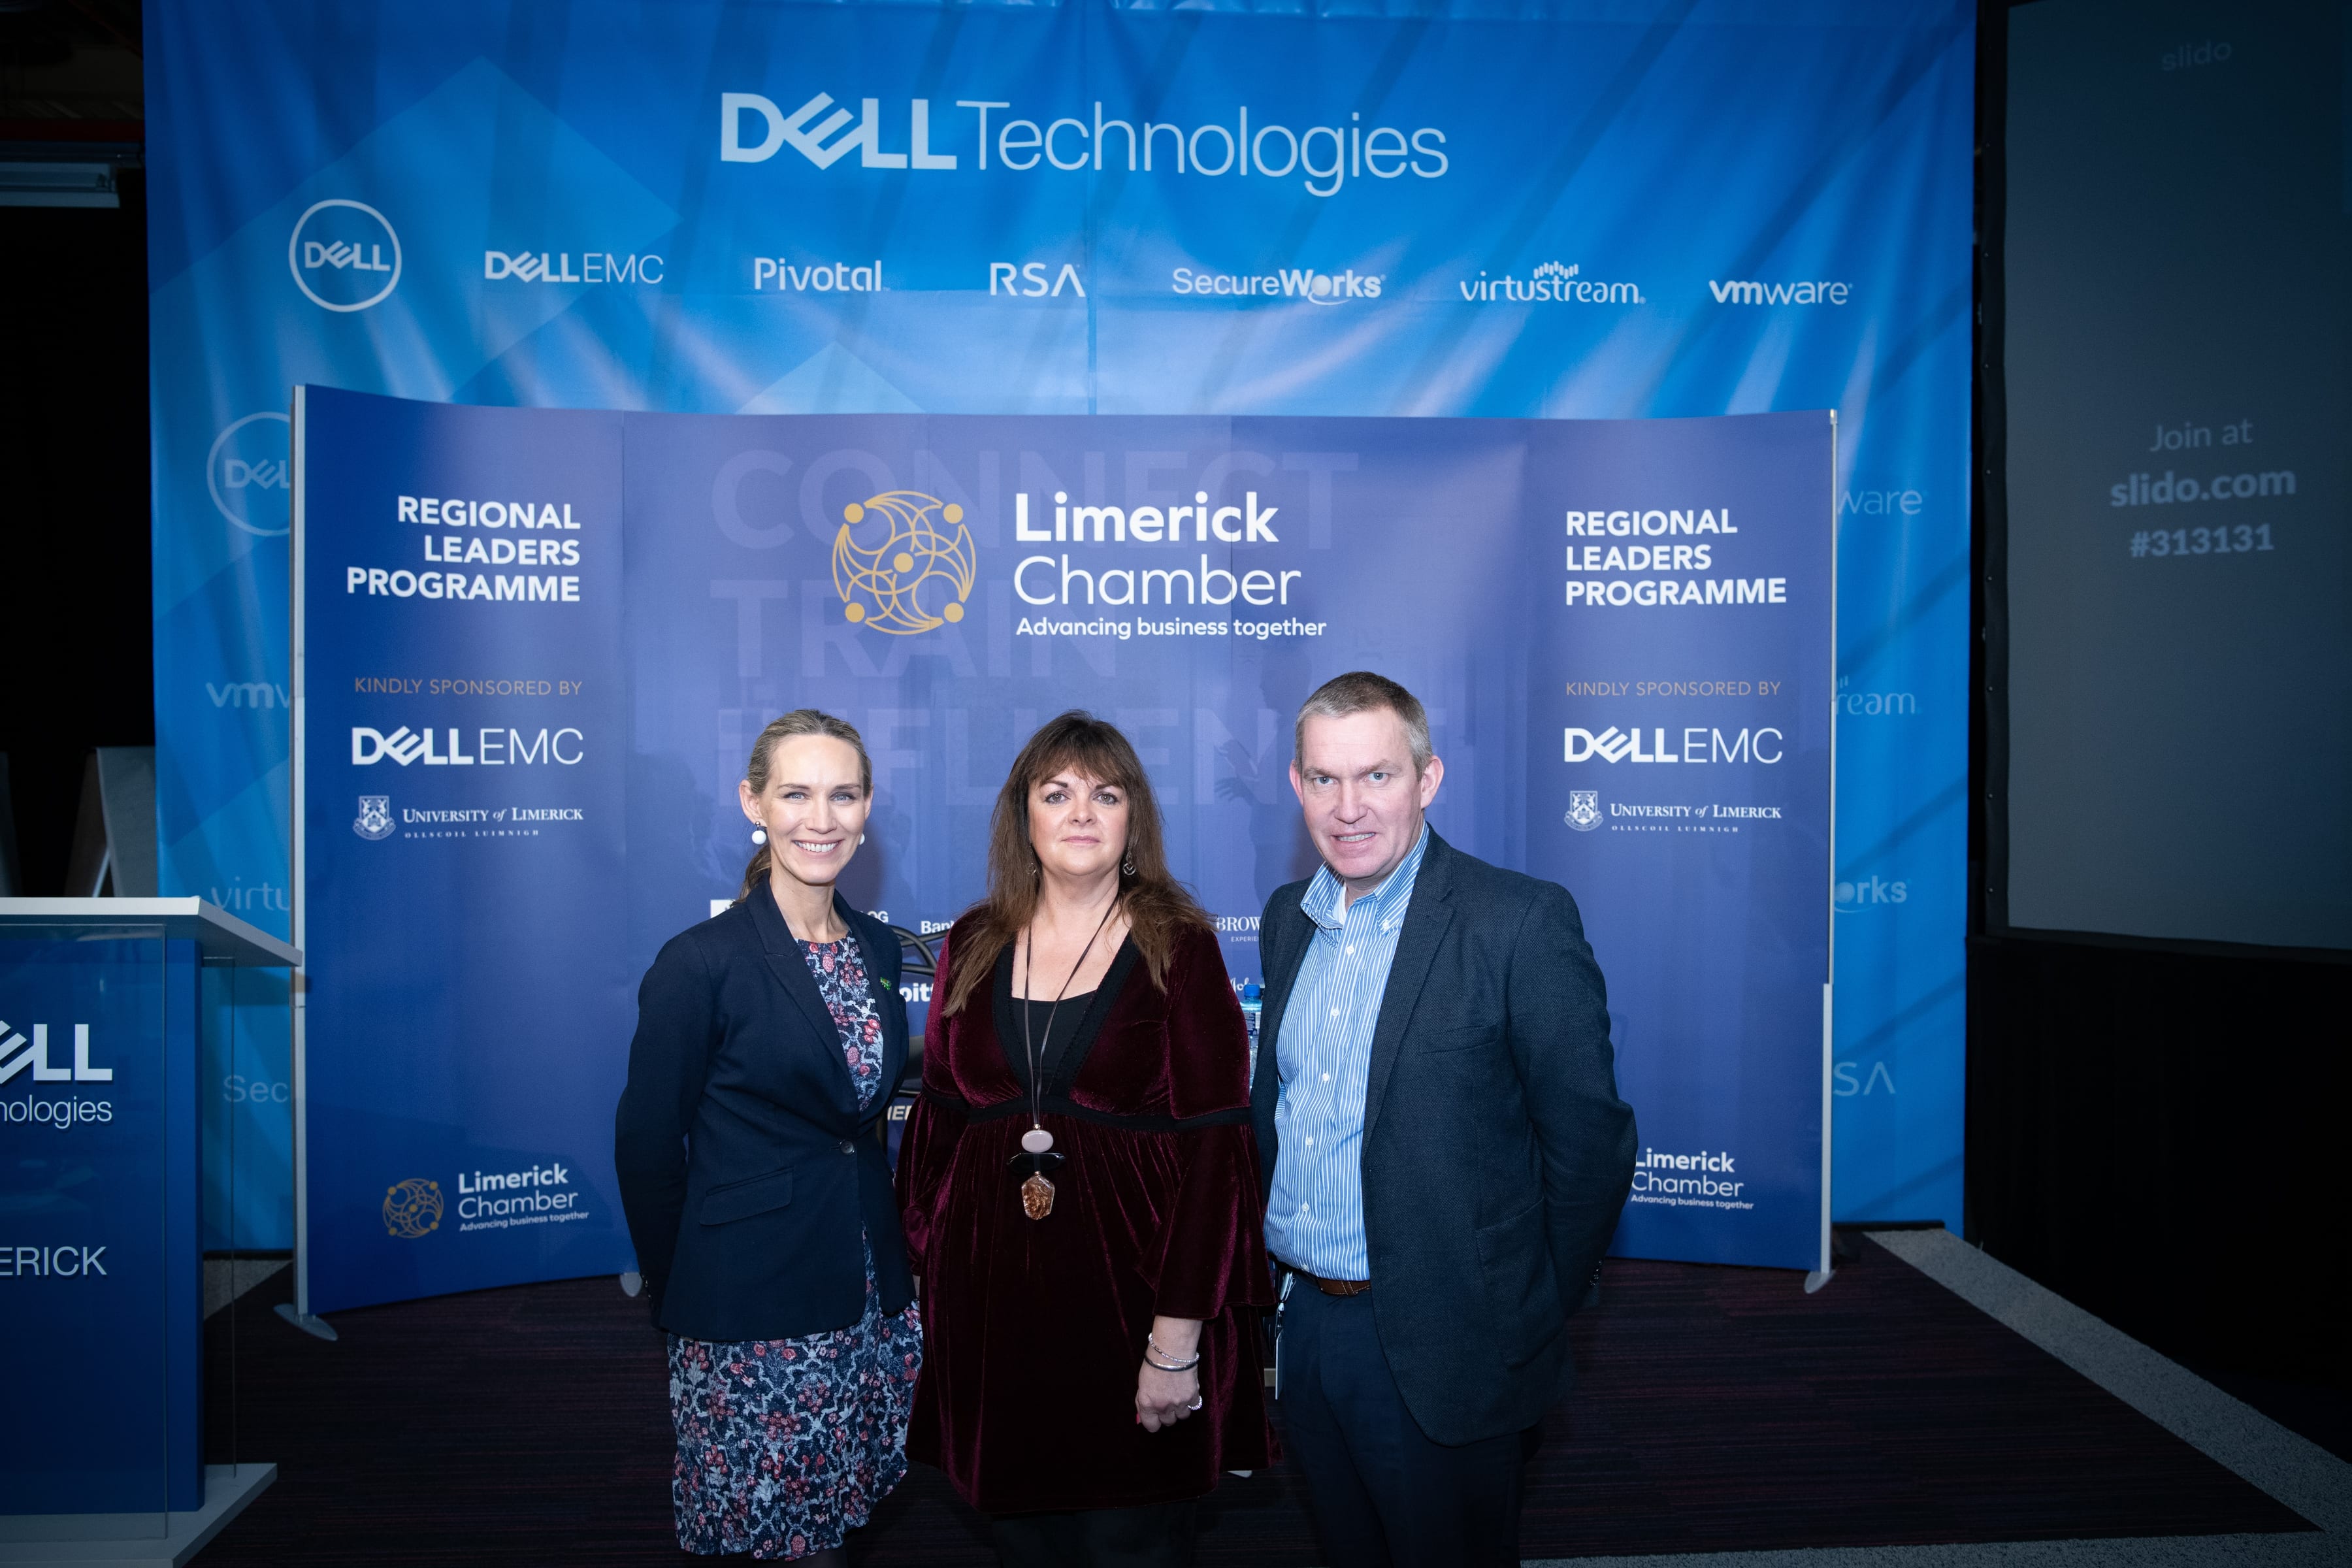 No repro fee- Regional Leaders Programme which took place on 11 December in Dell EMC, Guest speaker Eleanor McEvoy - From Left to Right: Dee Ryan - CEO Limerick Chamber, Guest speaker Eleanor McEvoy, Sean O’Reilly - EMEA VP of Logistics at Dell Technologies
Photo credit Shauna Kennedy